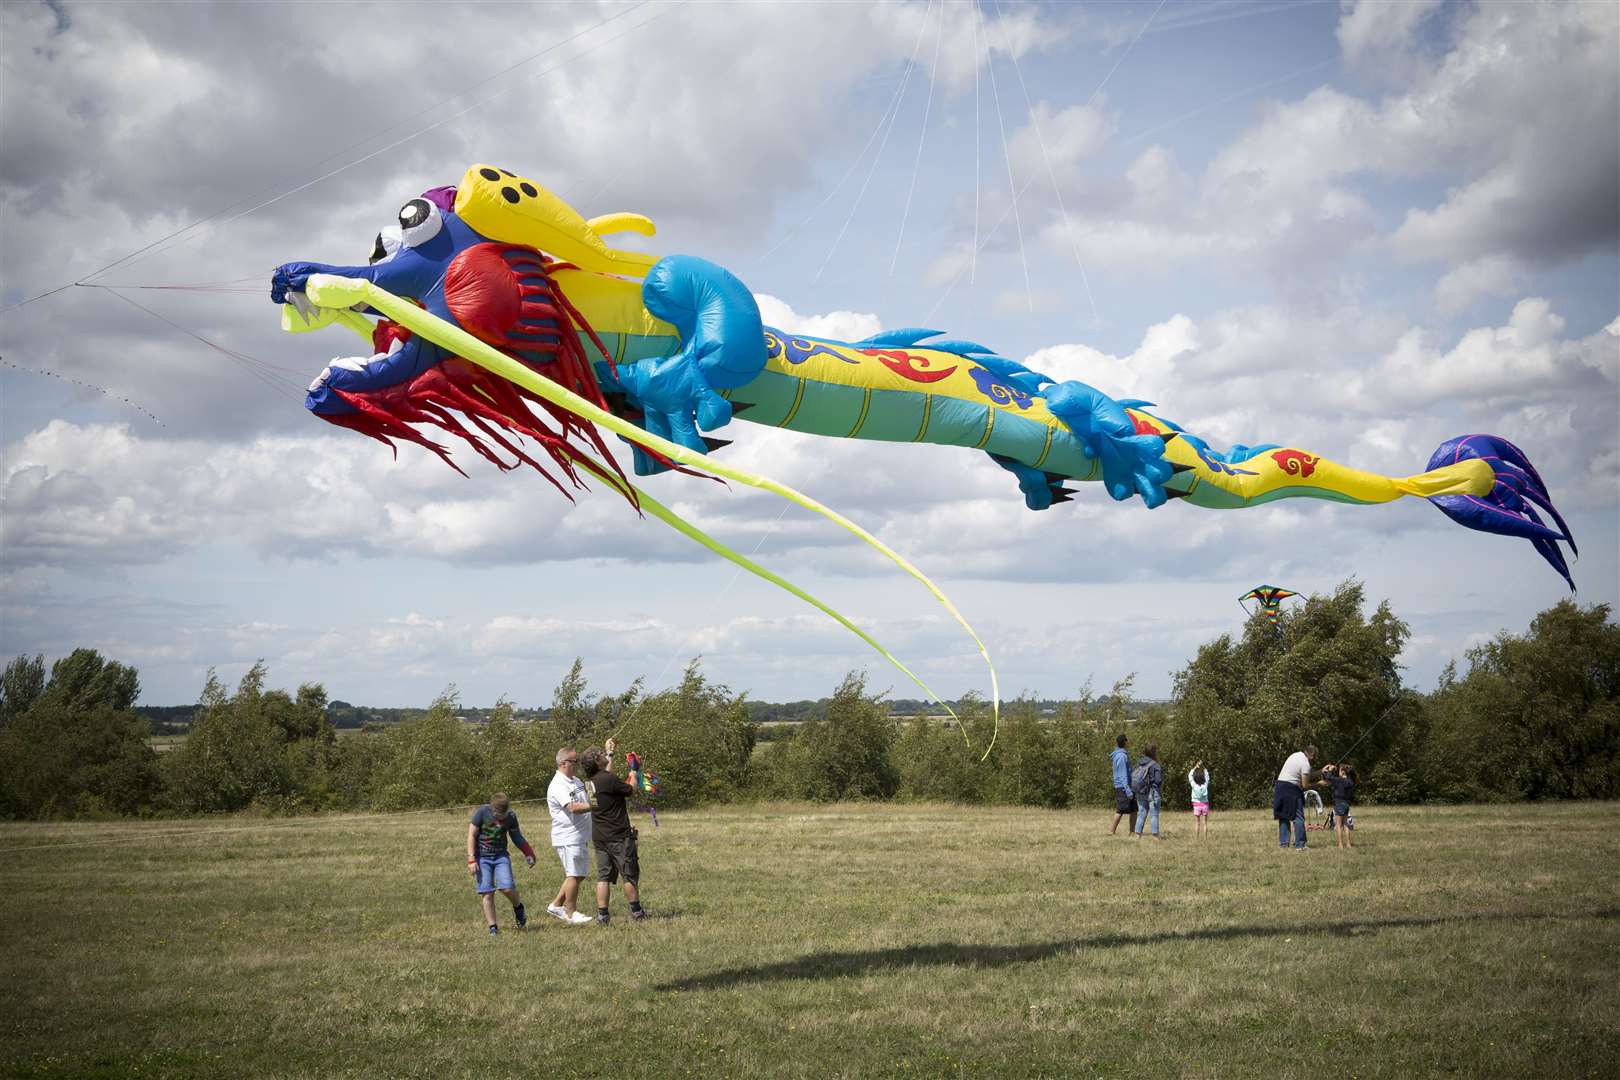 The Wind Festival blows in at Deals' Betteshanger Country Park Picture: Andy Jones/Betteshanger Country Park